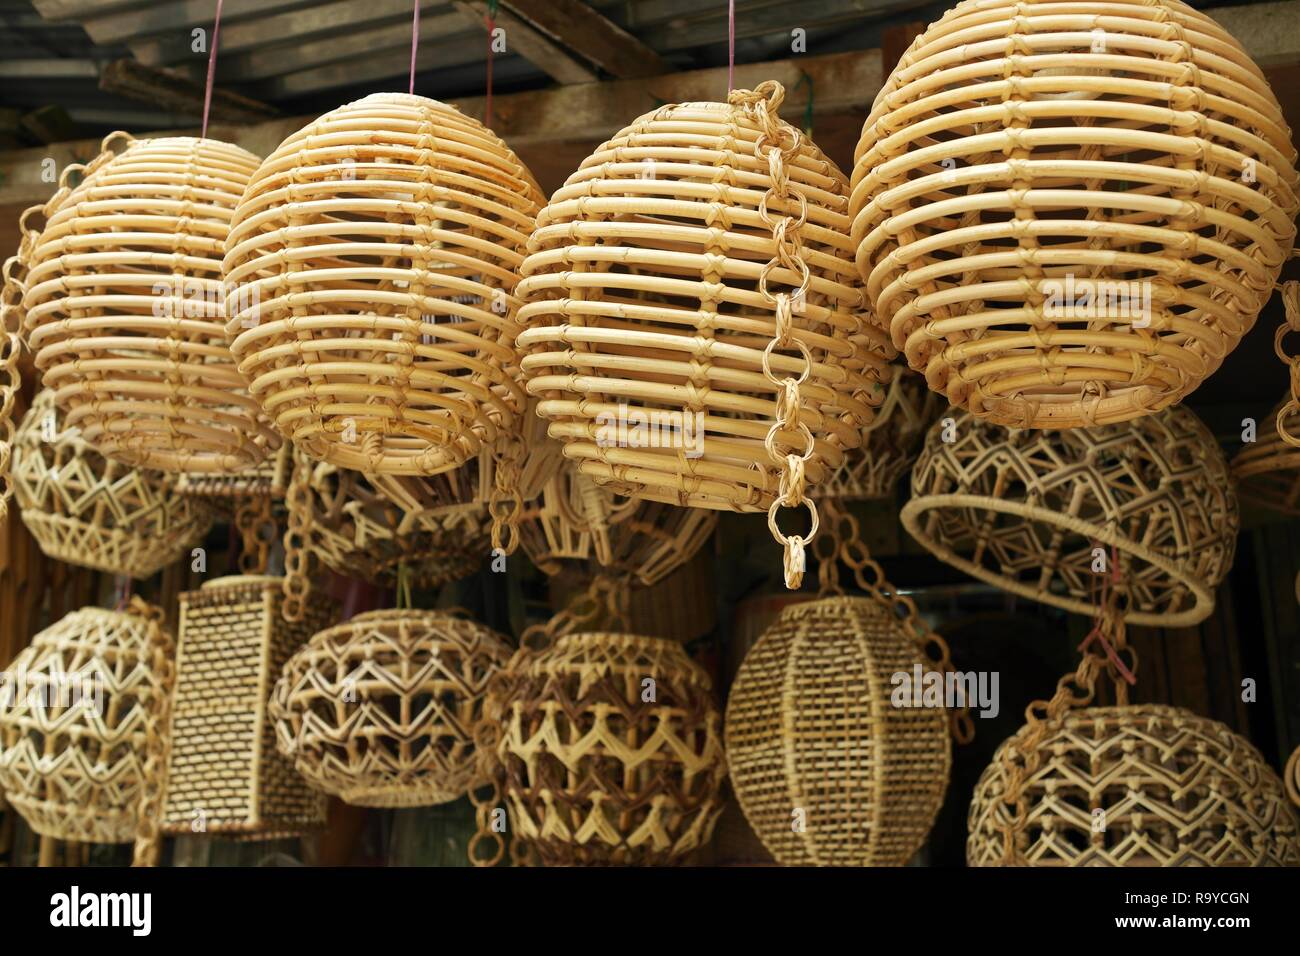 Rattan products Stock Photo